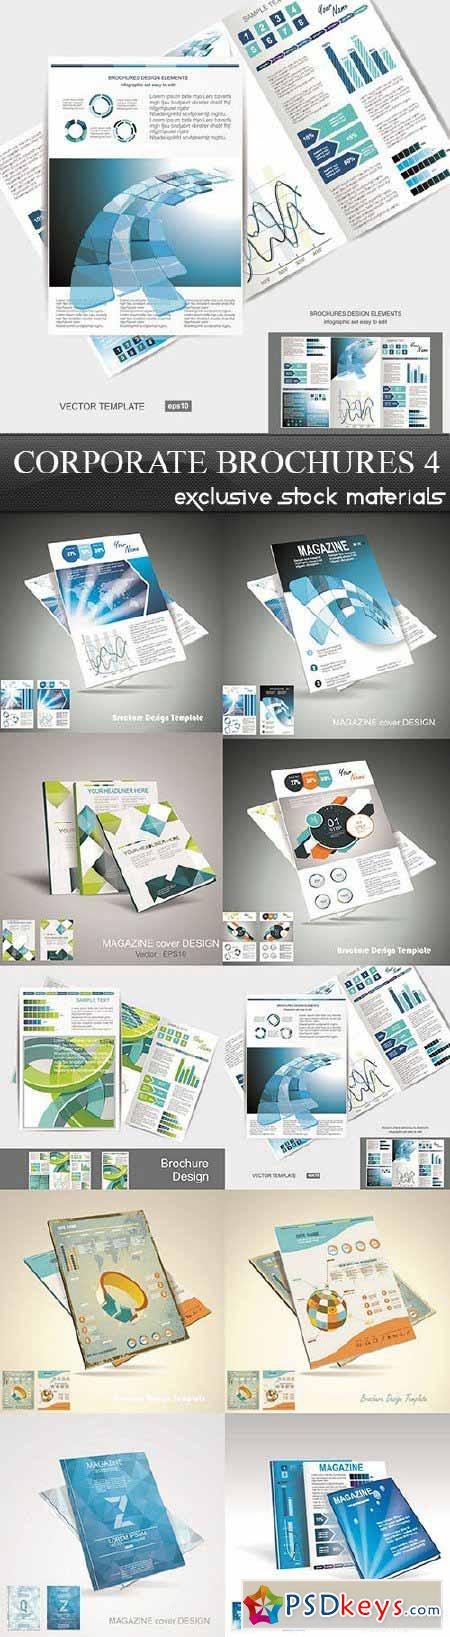 Collection of Corporate Brochures 4, 10xEPS